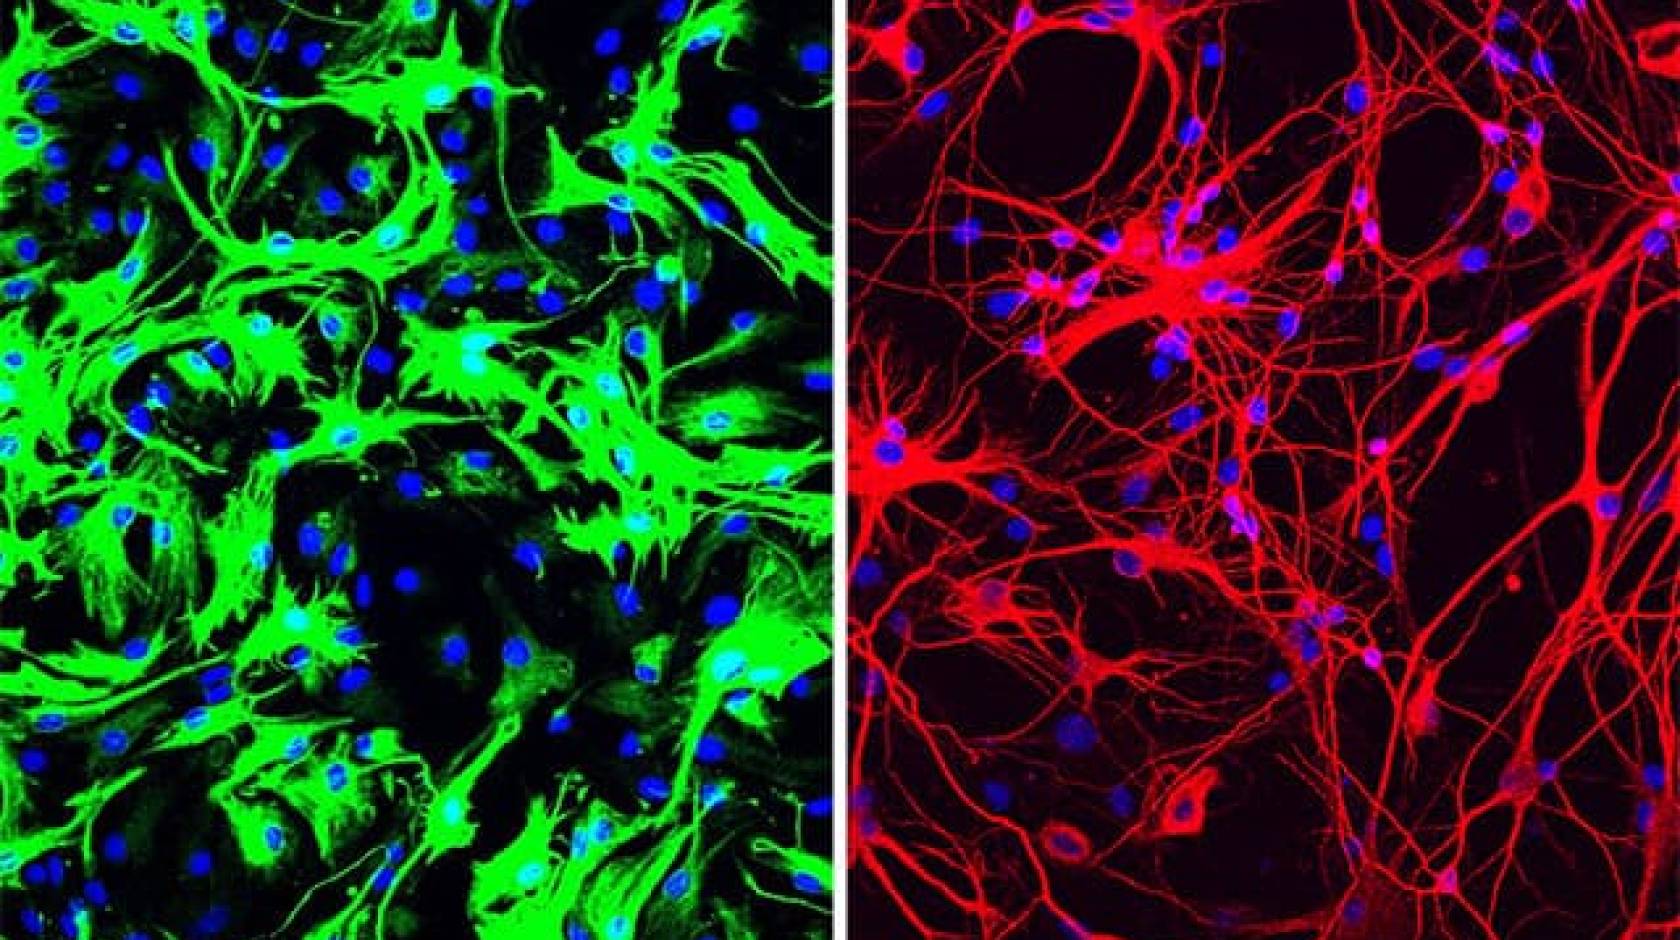 Left: mouse astrocytes (green) before reprogramming; Right: neurons (red) induced from mouse astrocytes after reprogramming with PTB antisense oligonucleotide treatment.